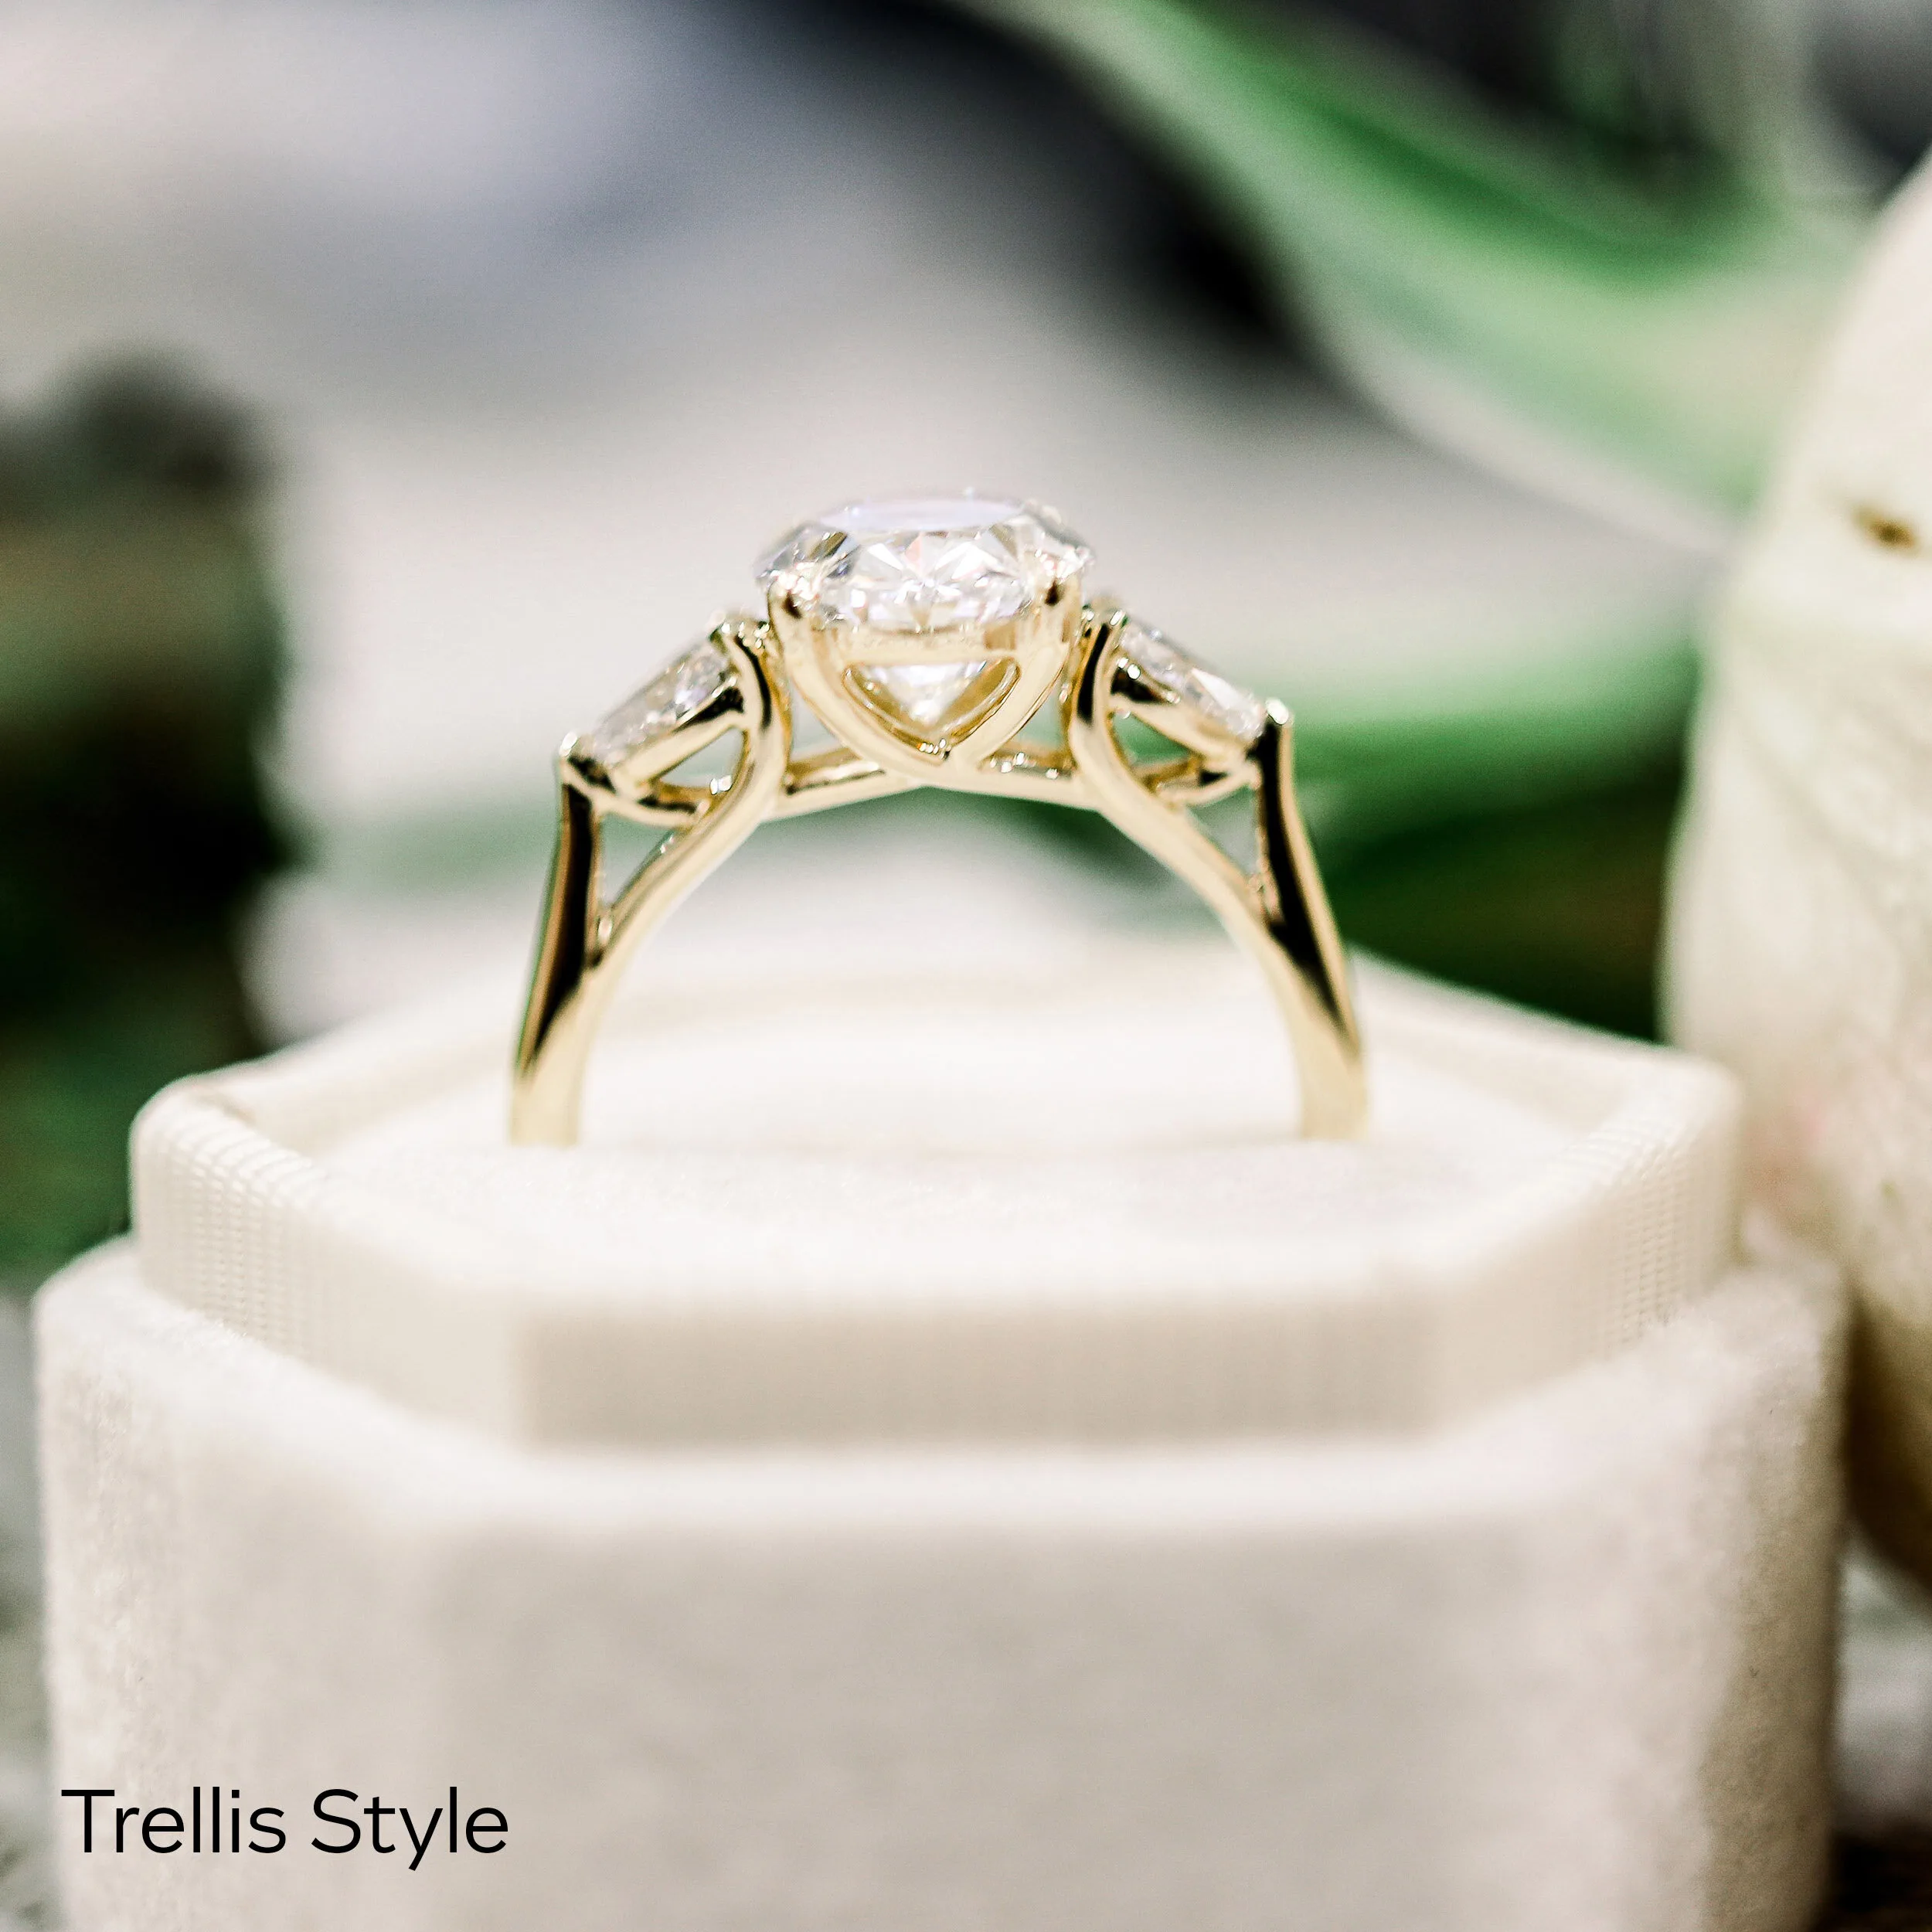 2ct oval lab grown diamond with pear side stones set in 14k yellow gold trellis style engagement ring